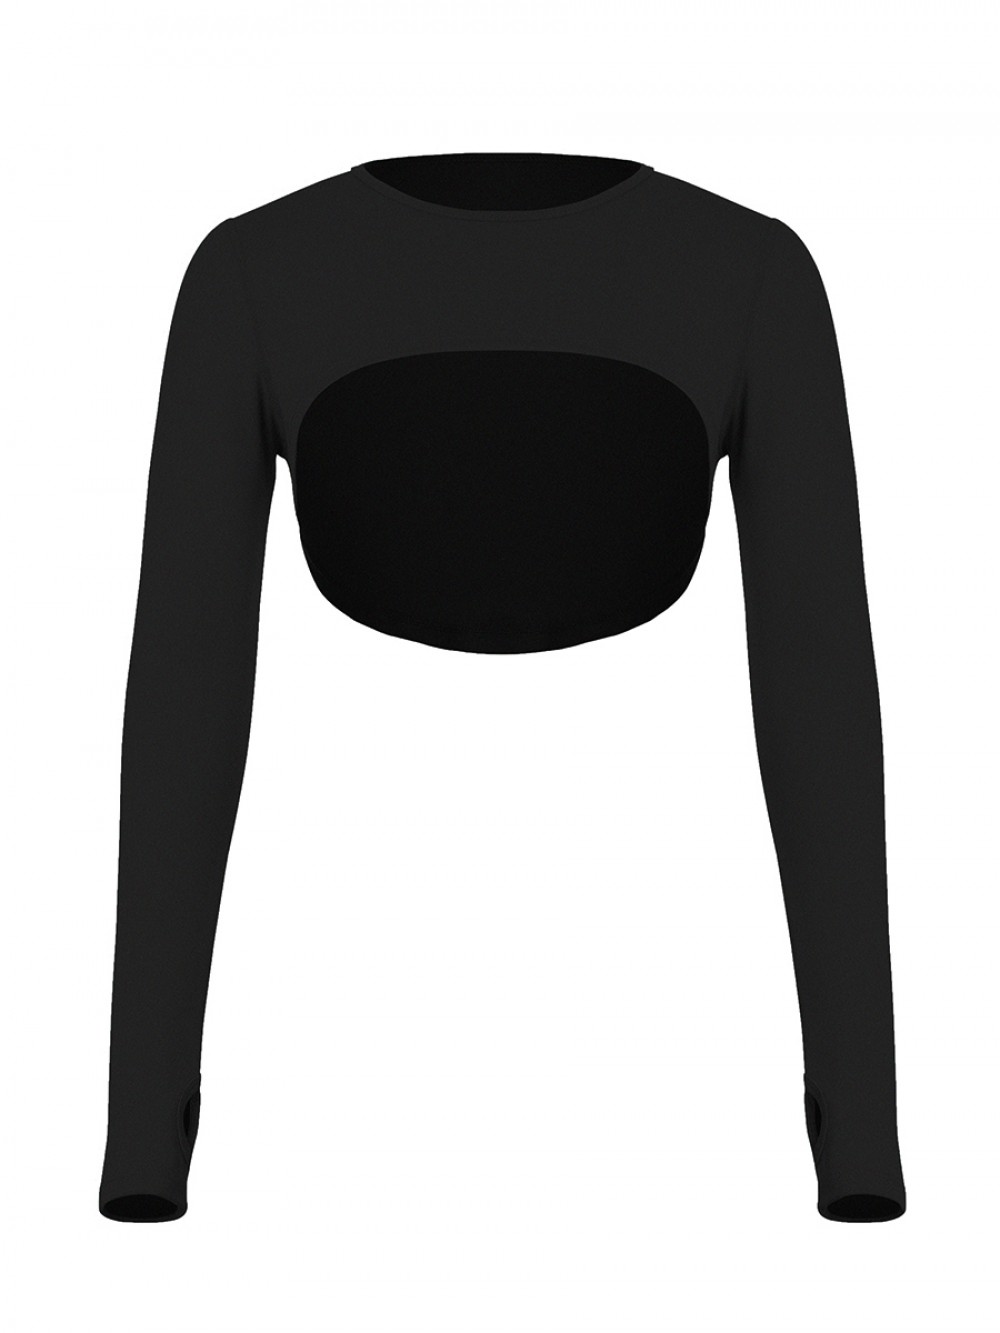 Black Round Collar Long Sleeve Crop Top Running Outfits